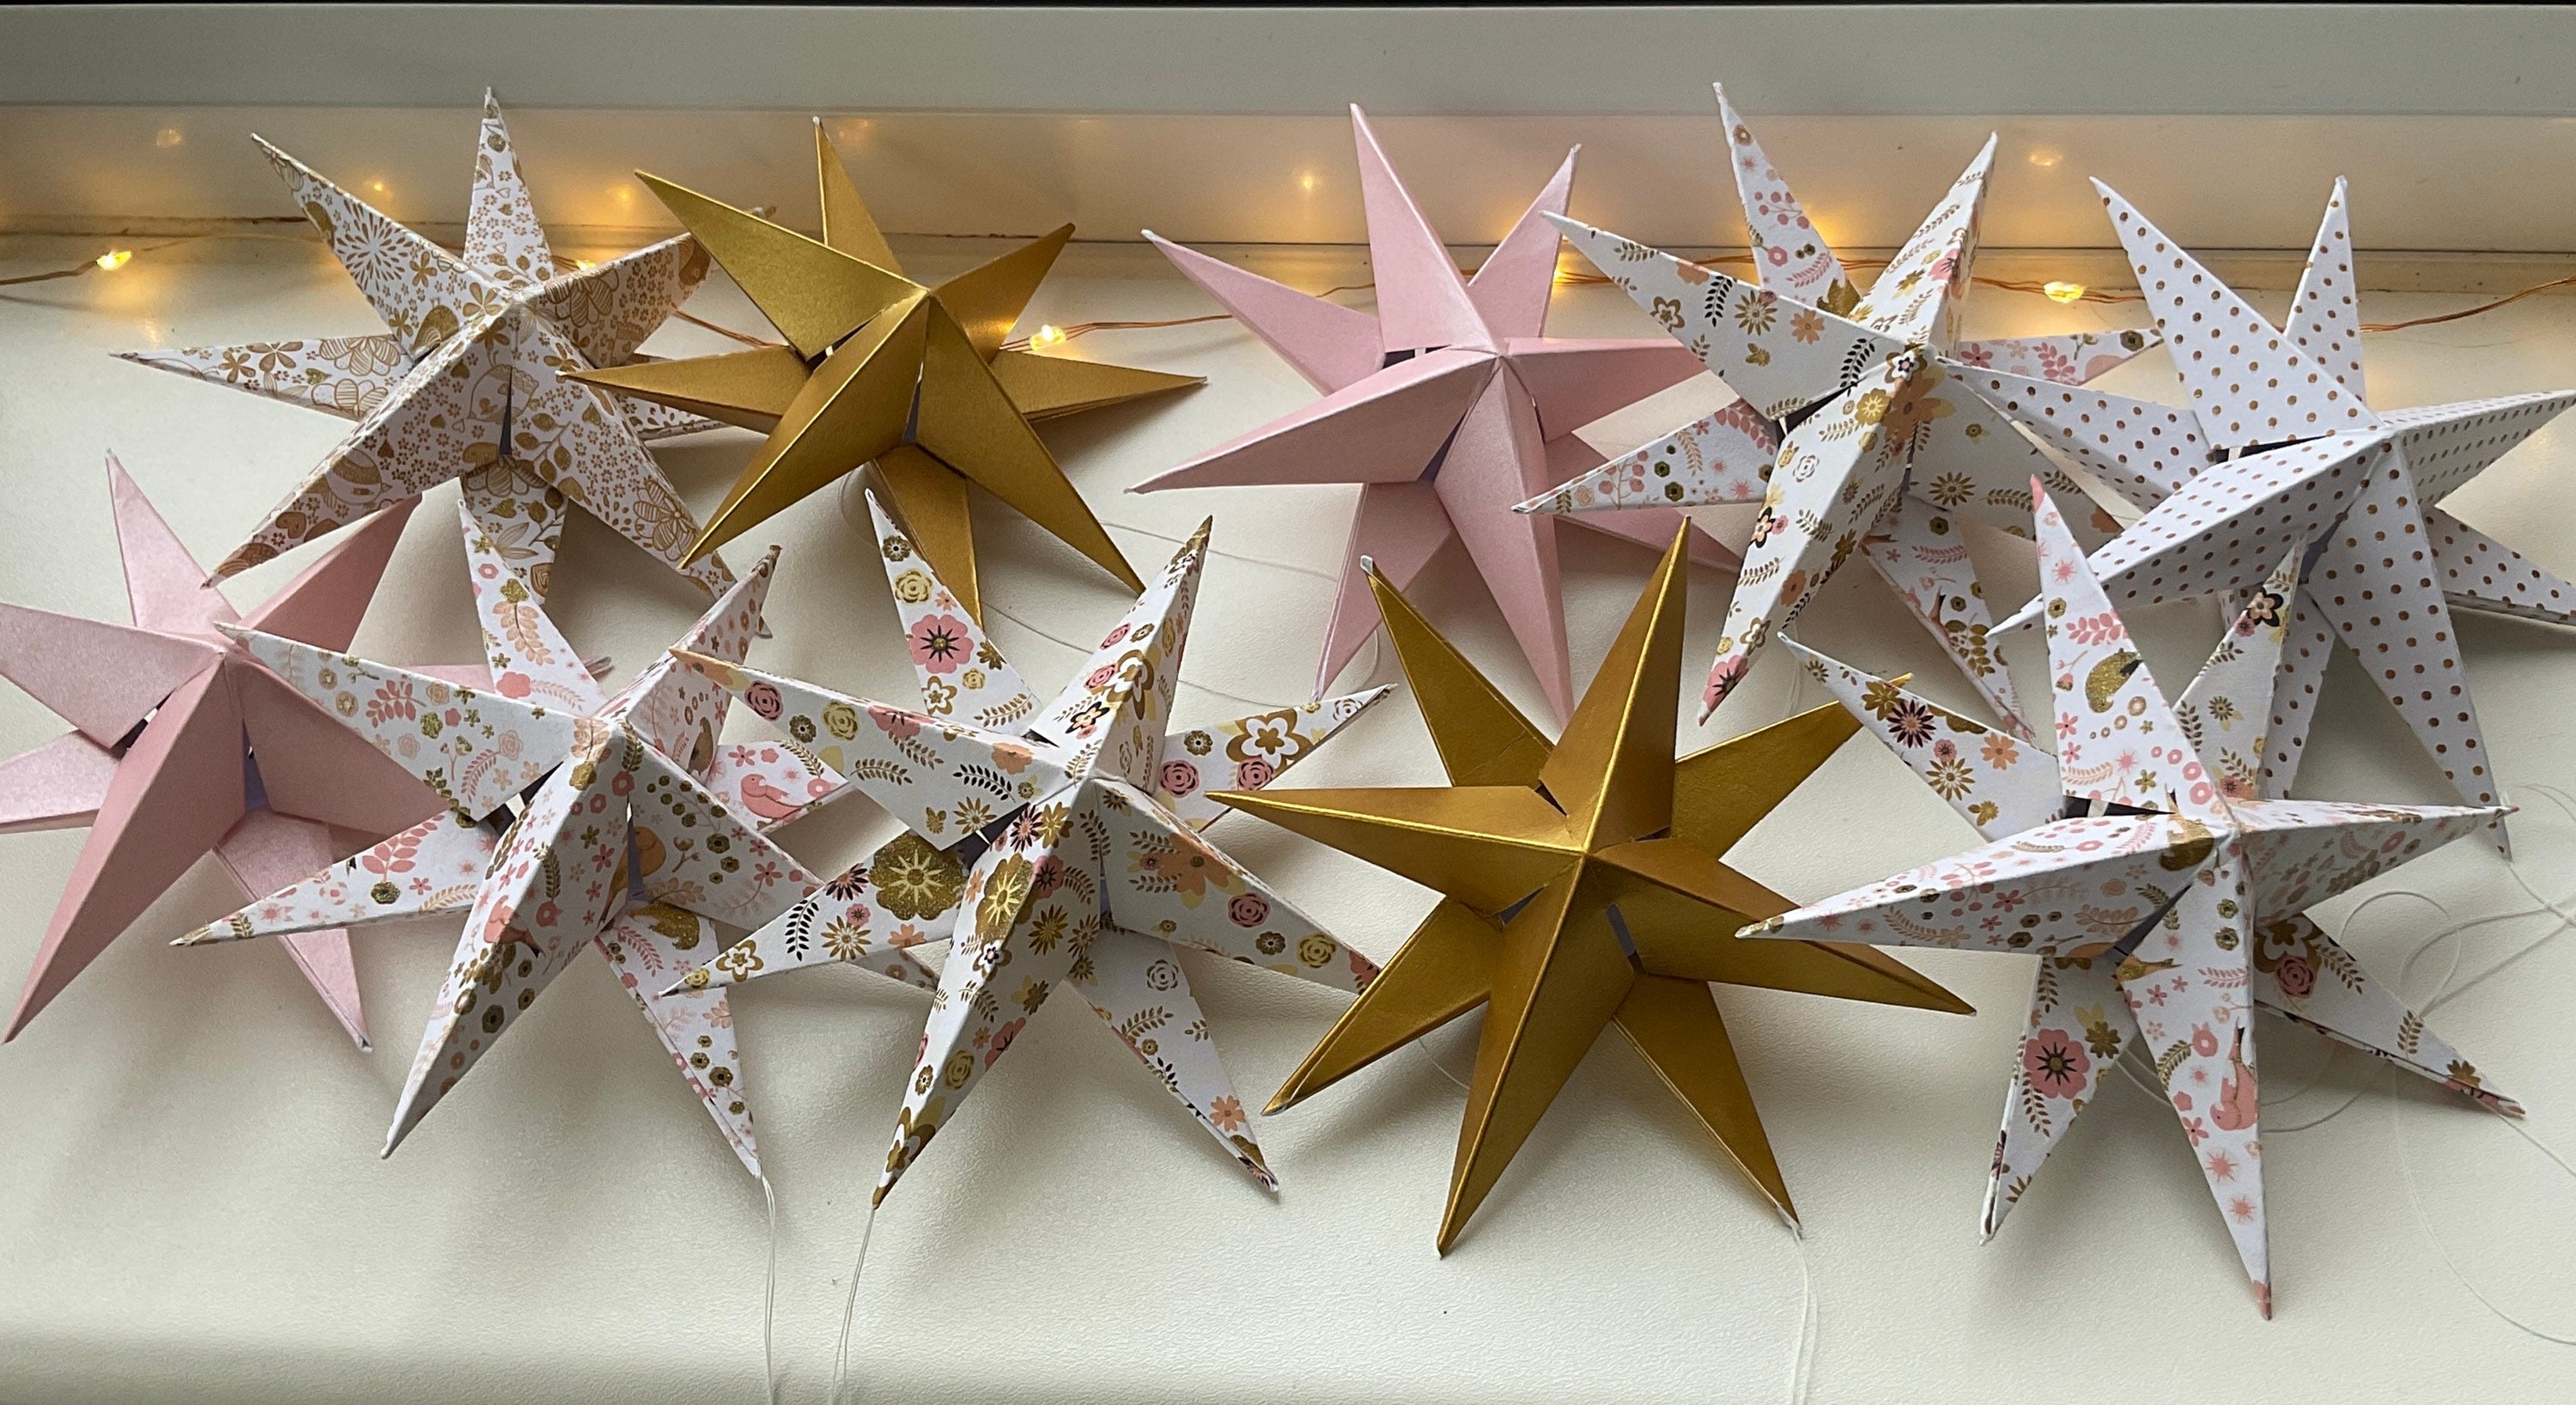  Foeipy Origami Stars Papers Pink Origami Star Paper